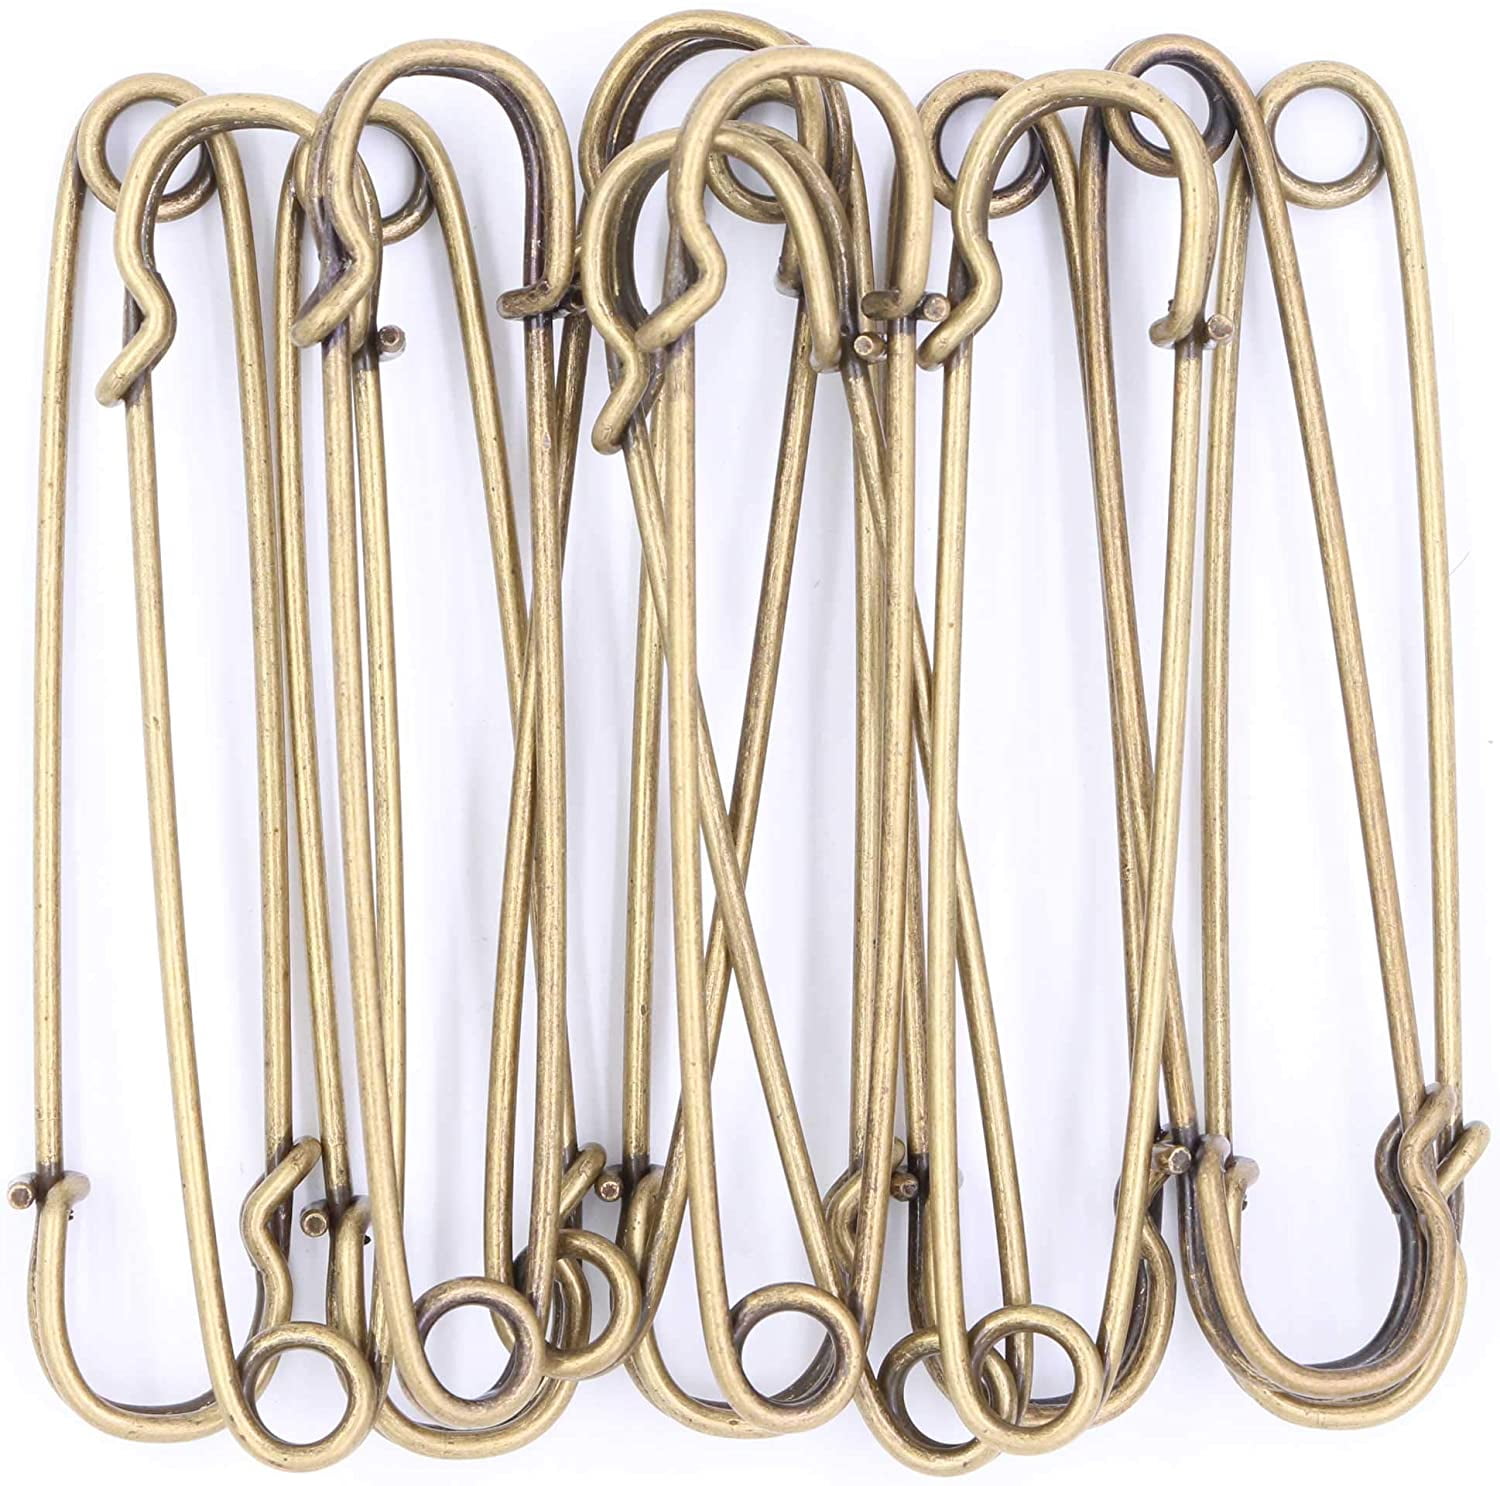 Officepal 4 inches Heavy Duty Safety Pins in a Box Container, Large